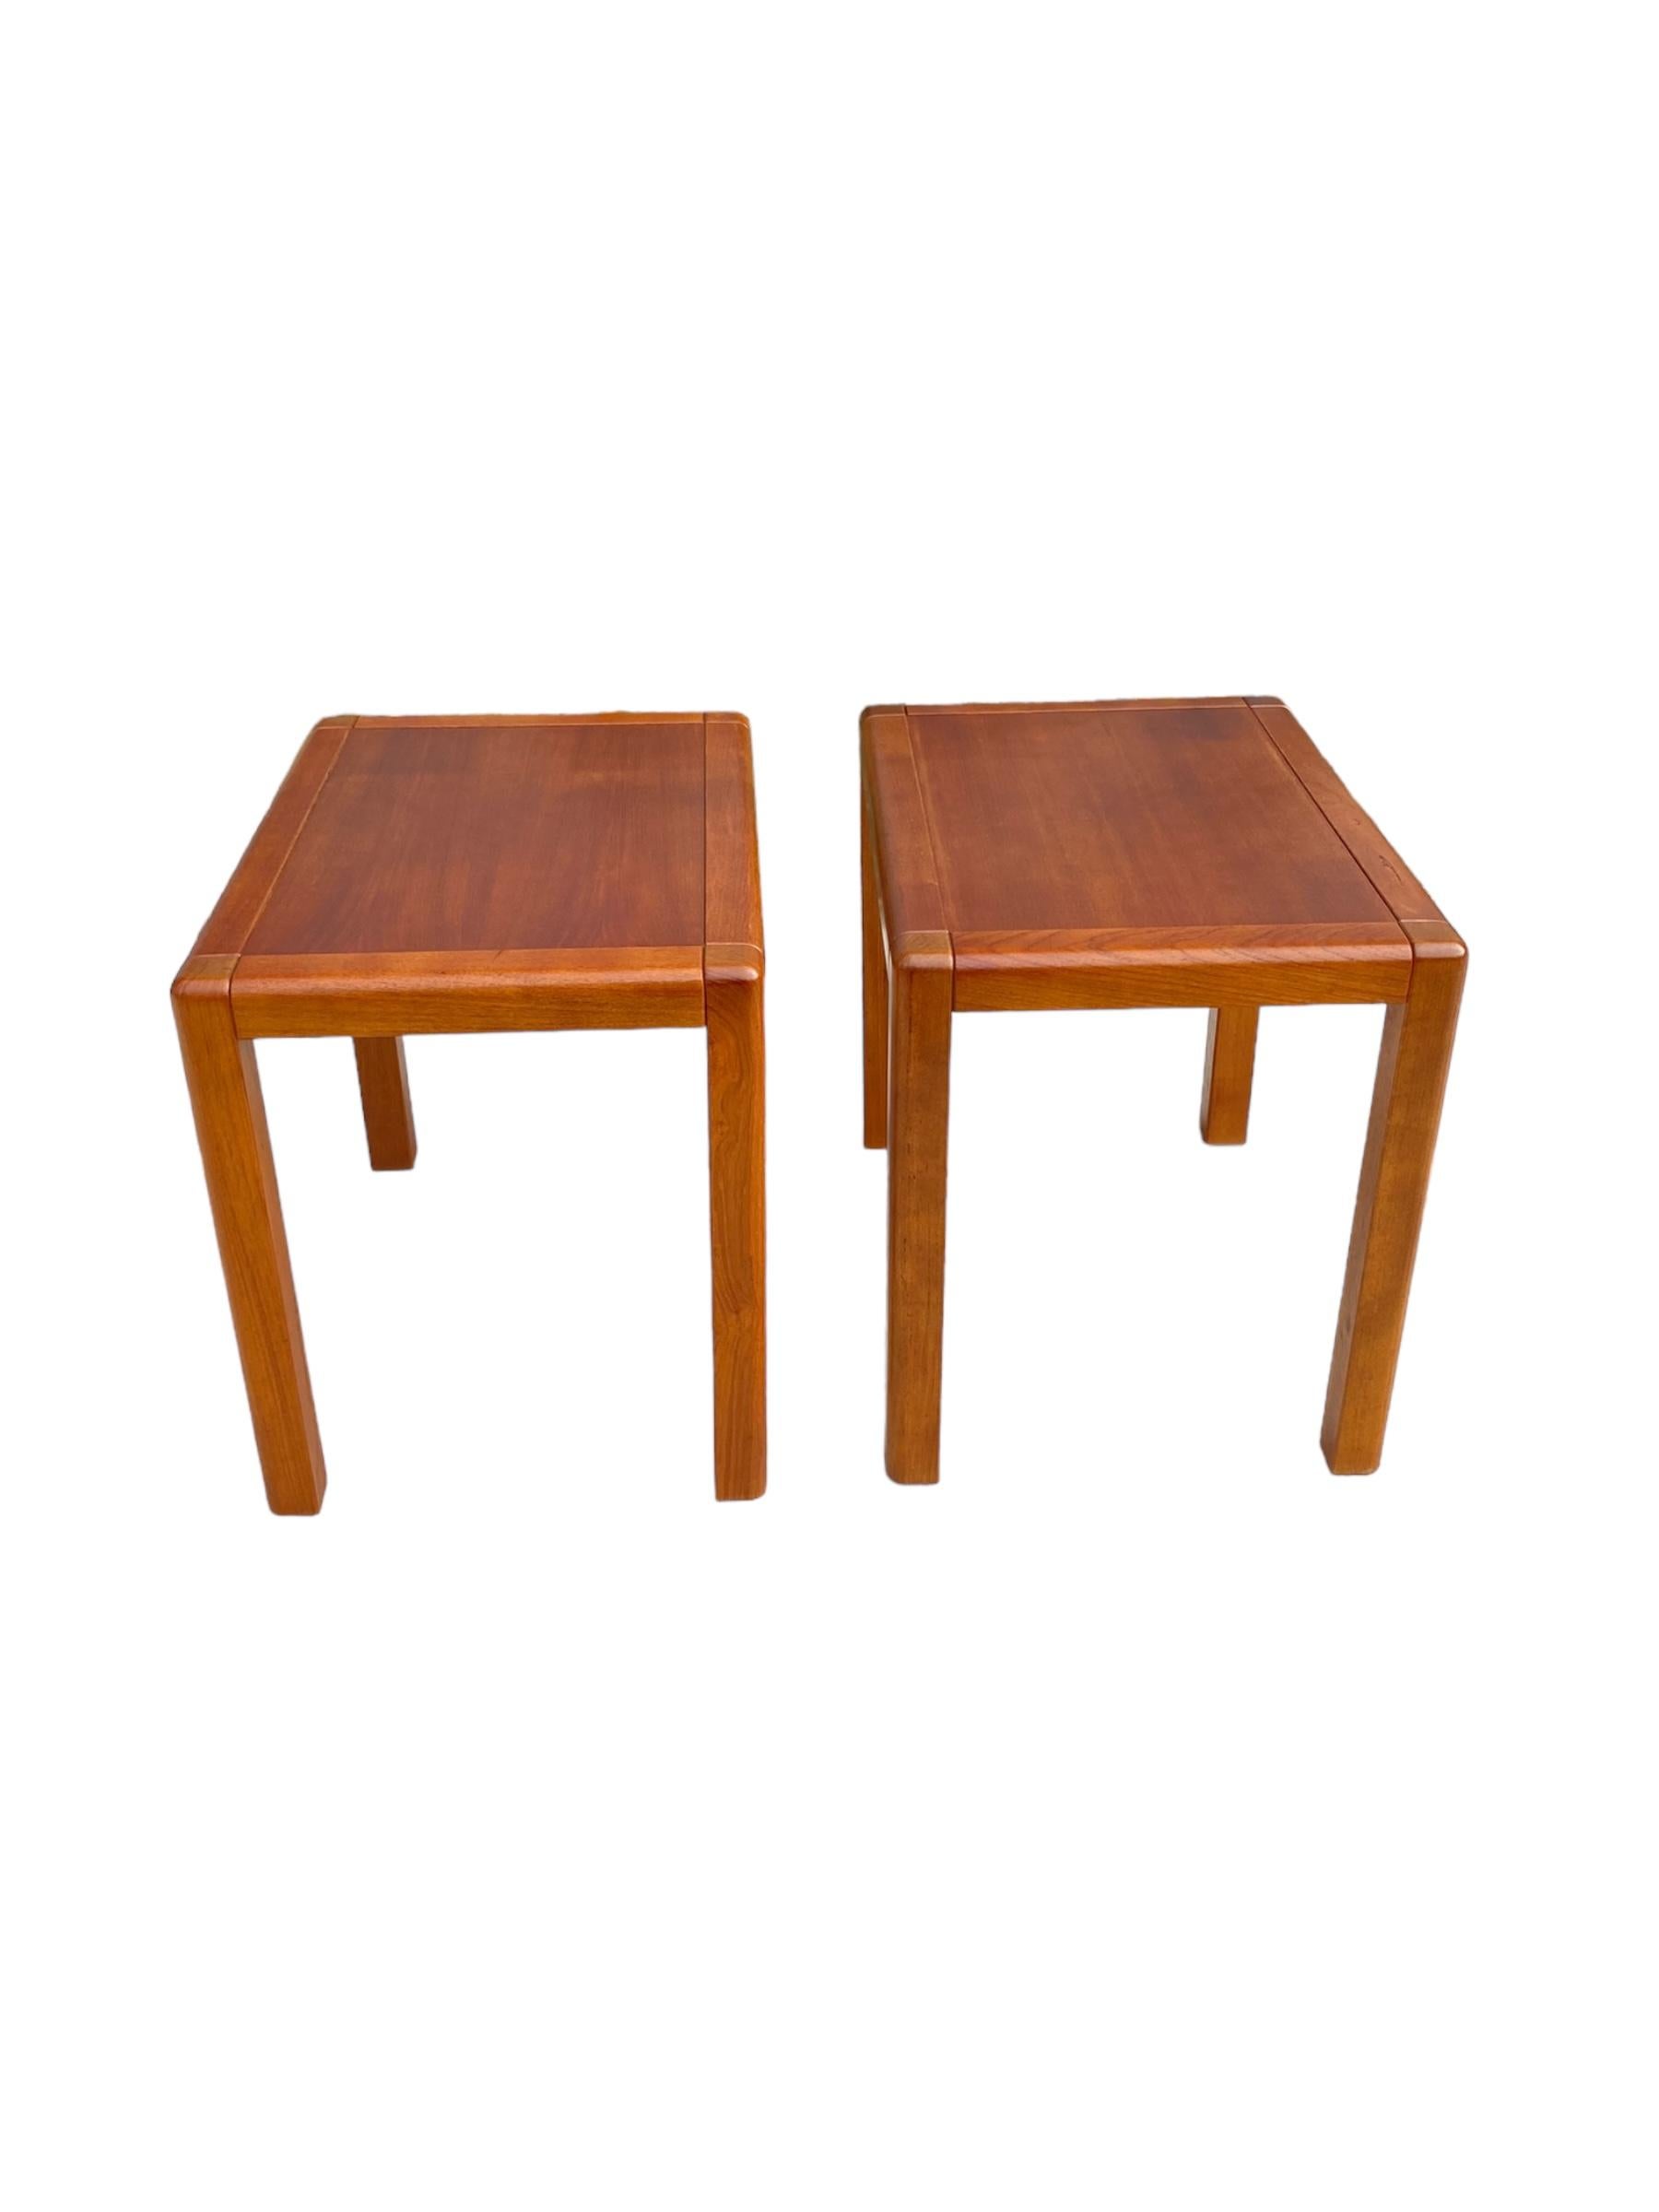 Danish Teak End Tables In Fair Condition For Sale In Brooklyn, NY